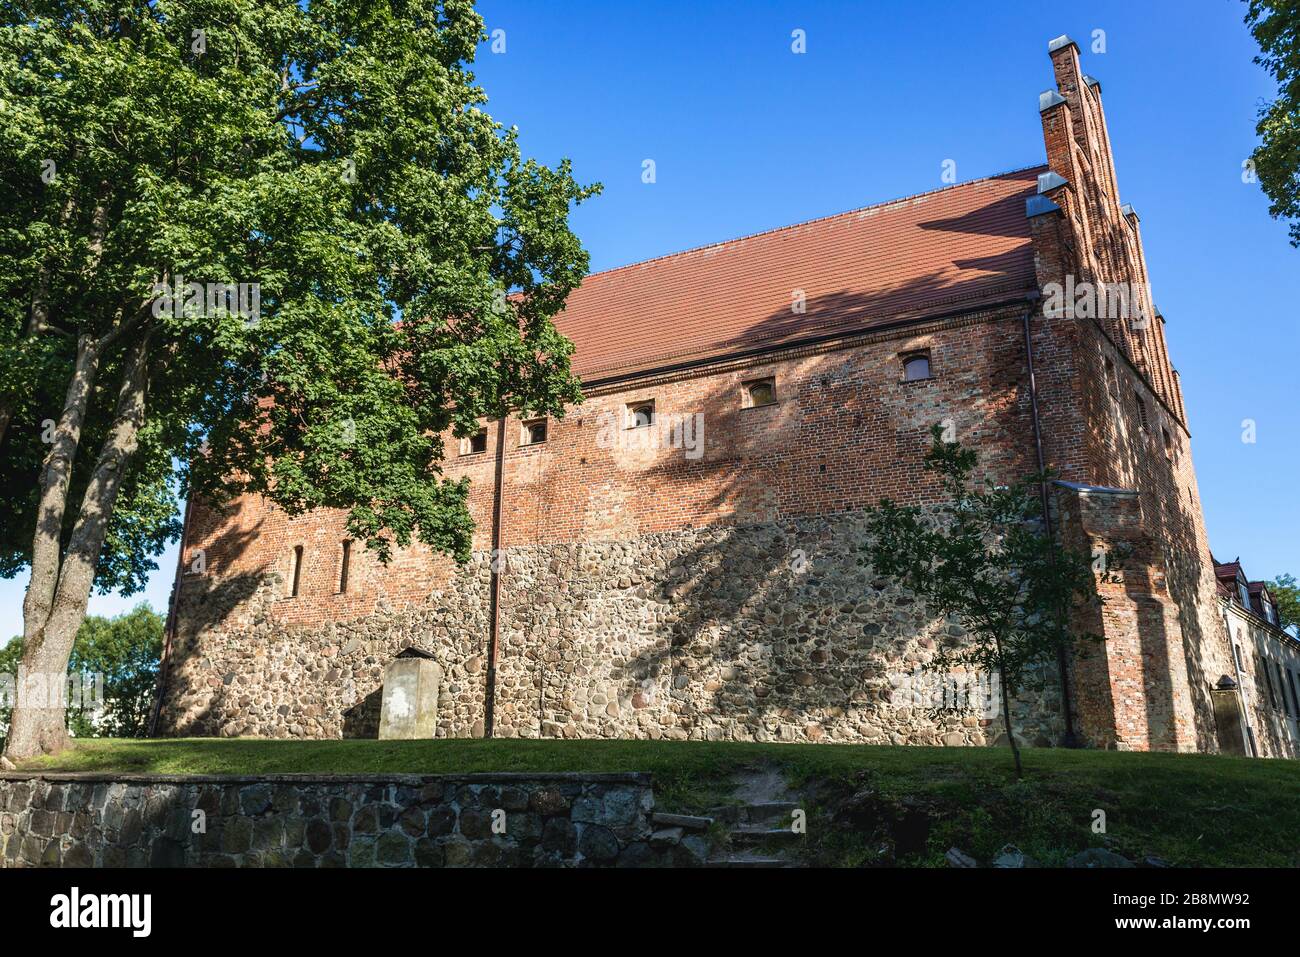 Medieval knights castle in Swidwin, capital of Swidwin County in West Pomeranian Voivodeship of northwestern Poland Stock Photo